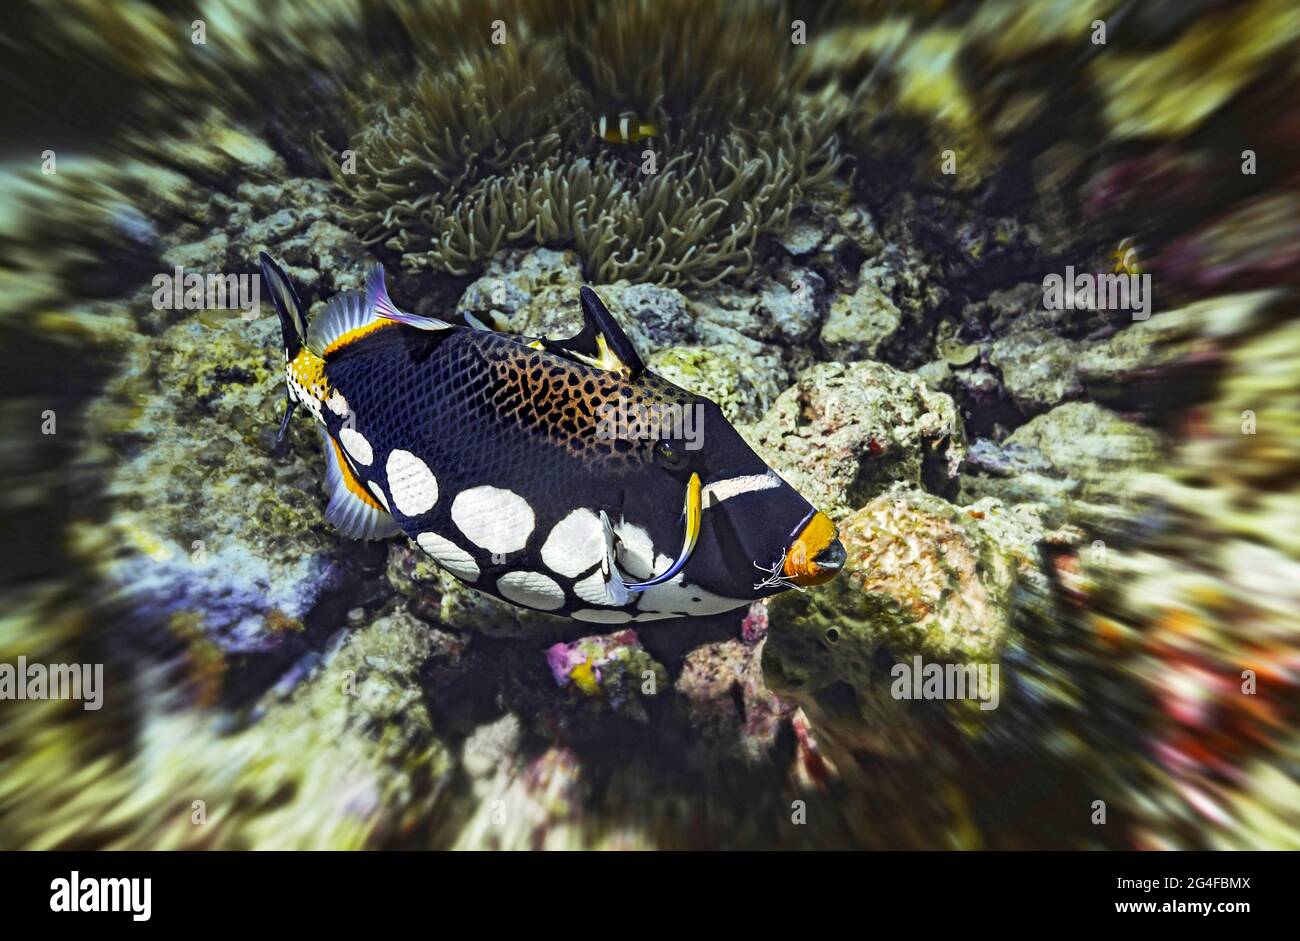 Leopard triggerfish (Balistoides conspicillum) with cleaner wrasse and cleaner shrimp, Wakatobi Dive Resort, Sulawesi, Indonesia Stock Photo